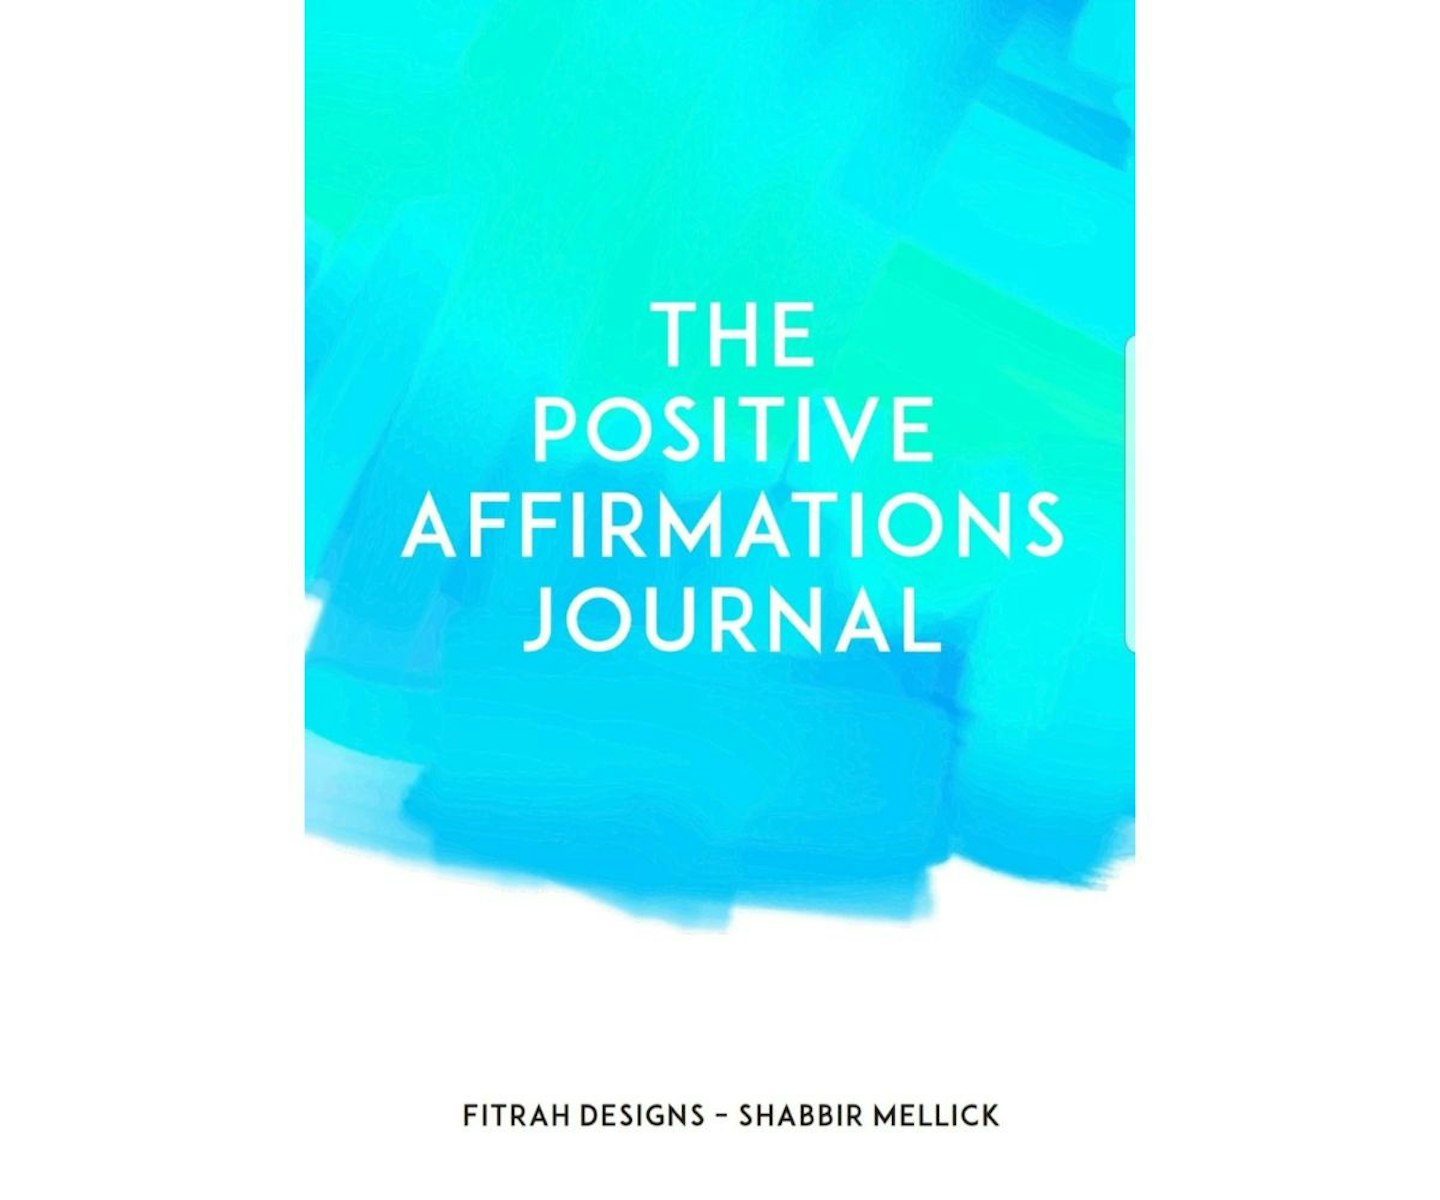 The Positive Affirmations Journal